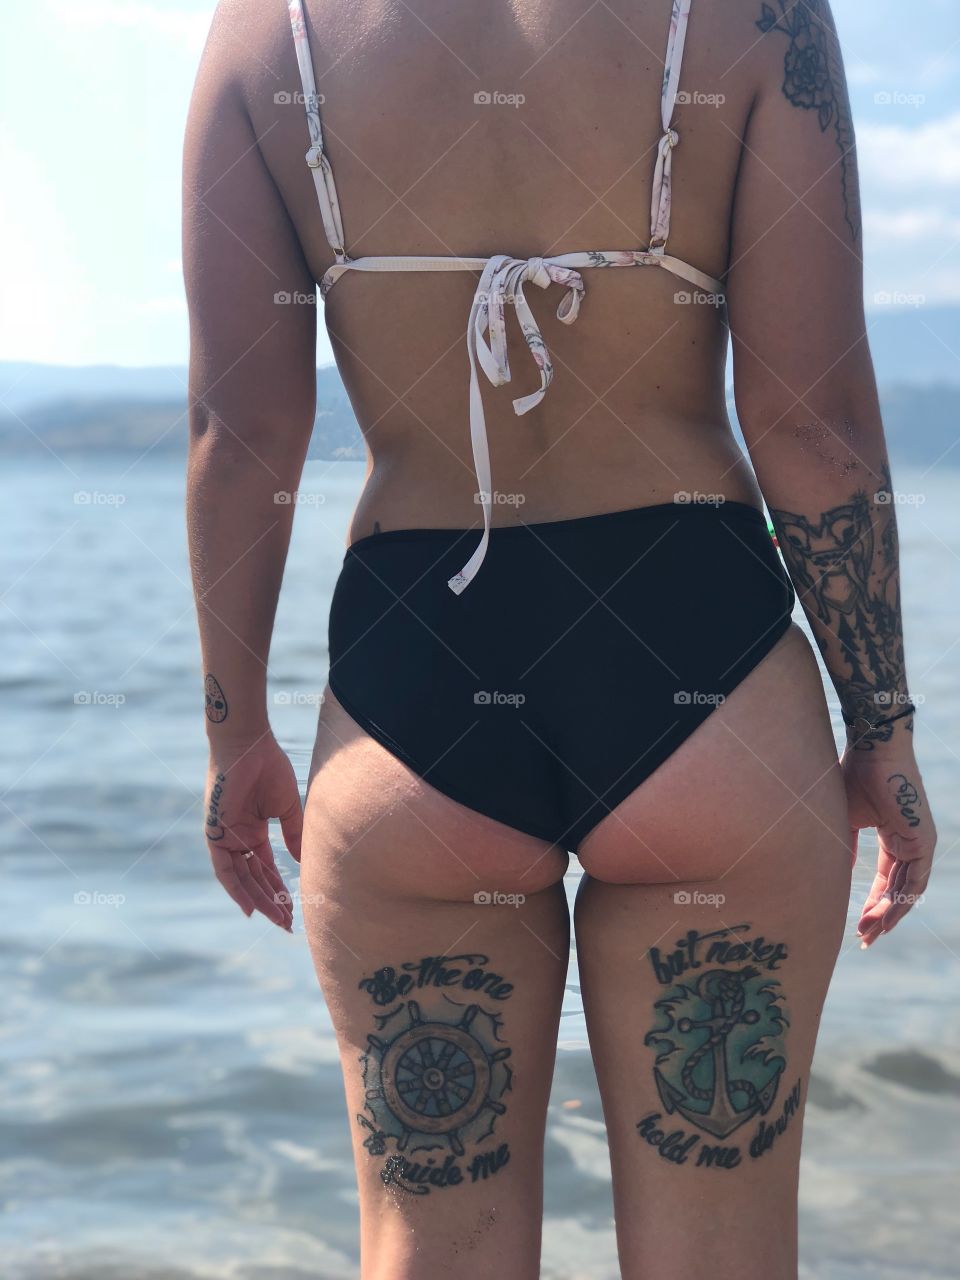 Booty and tattoos. What more can I say? 